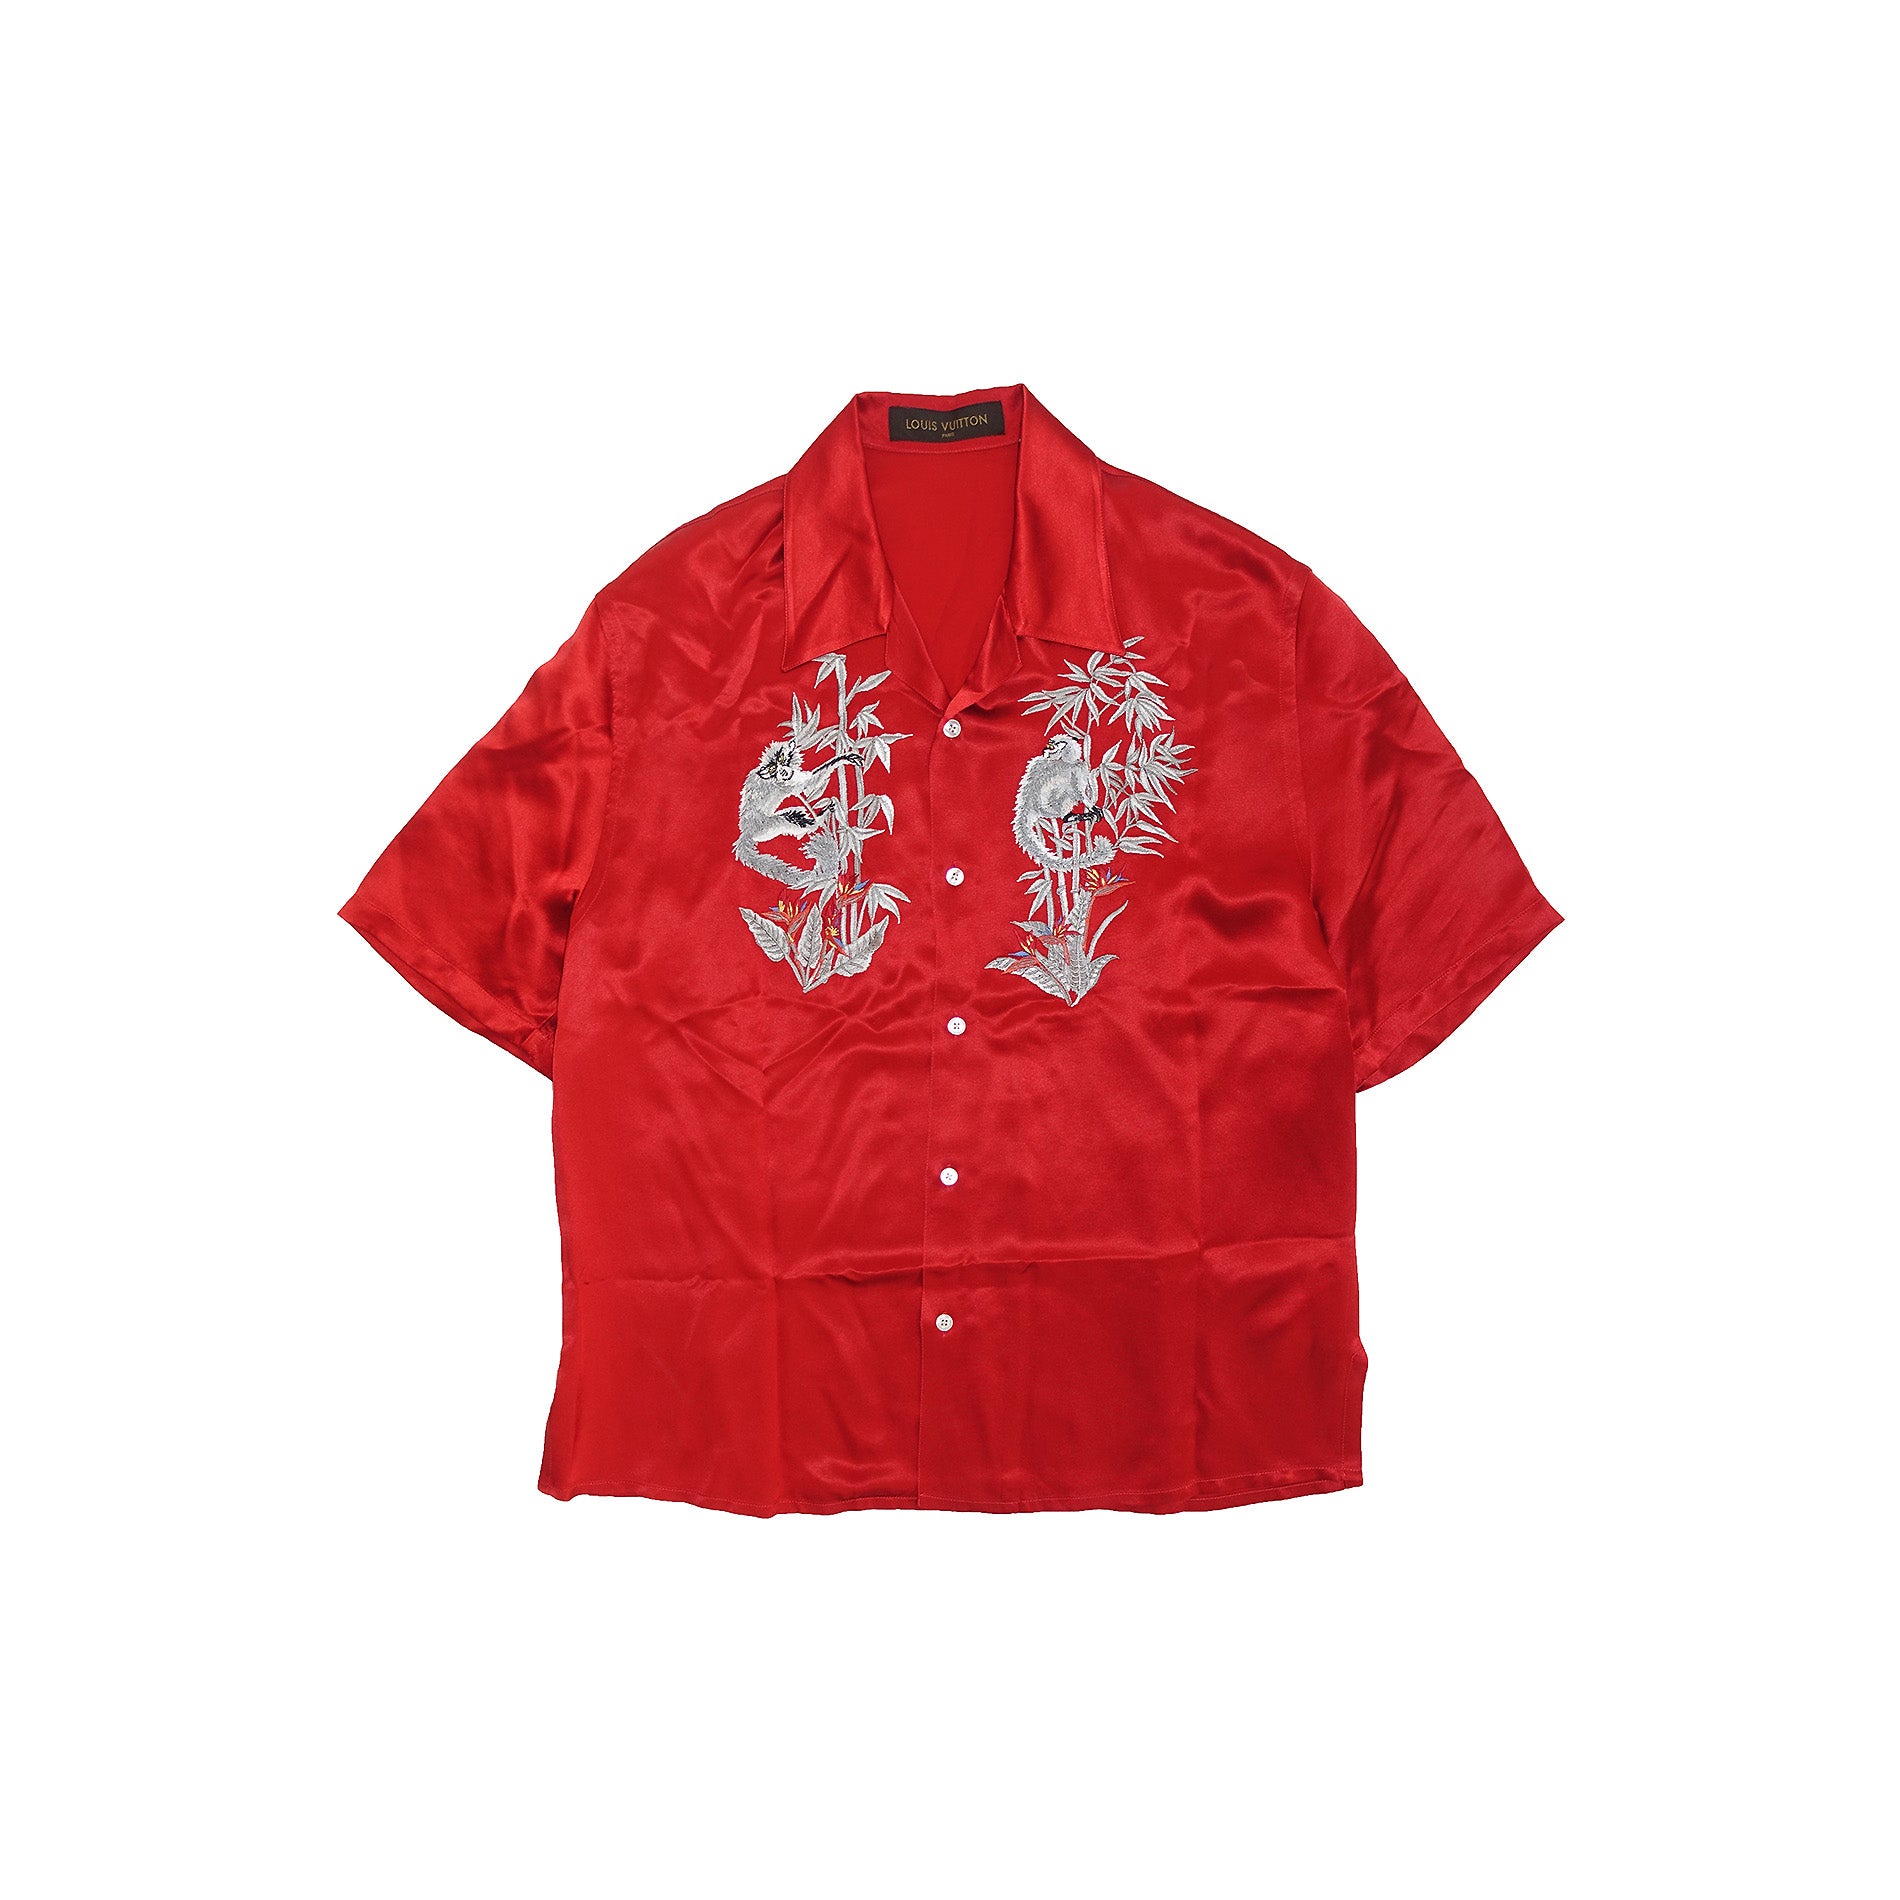 Louis Vuitton SS16 Red Embroidered Shirt